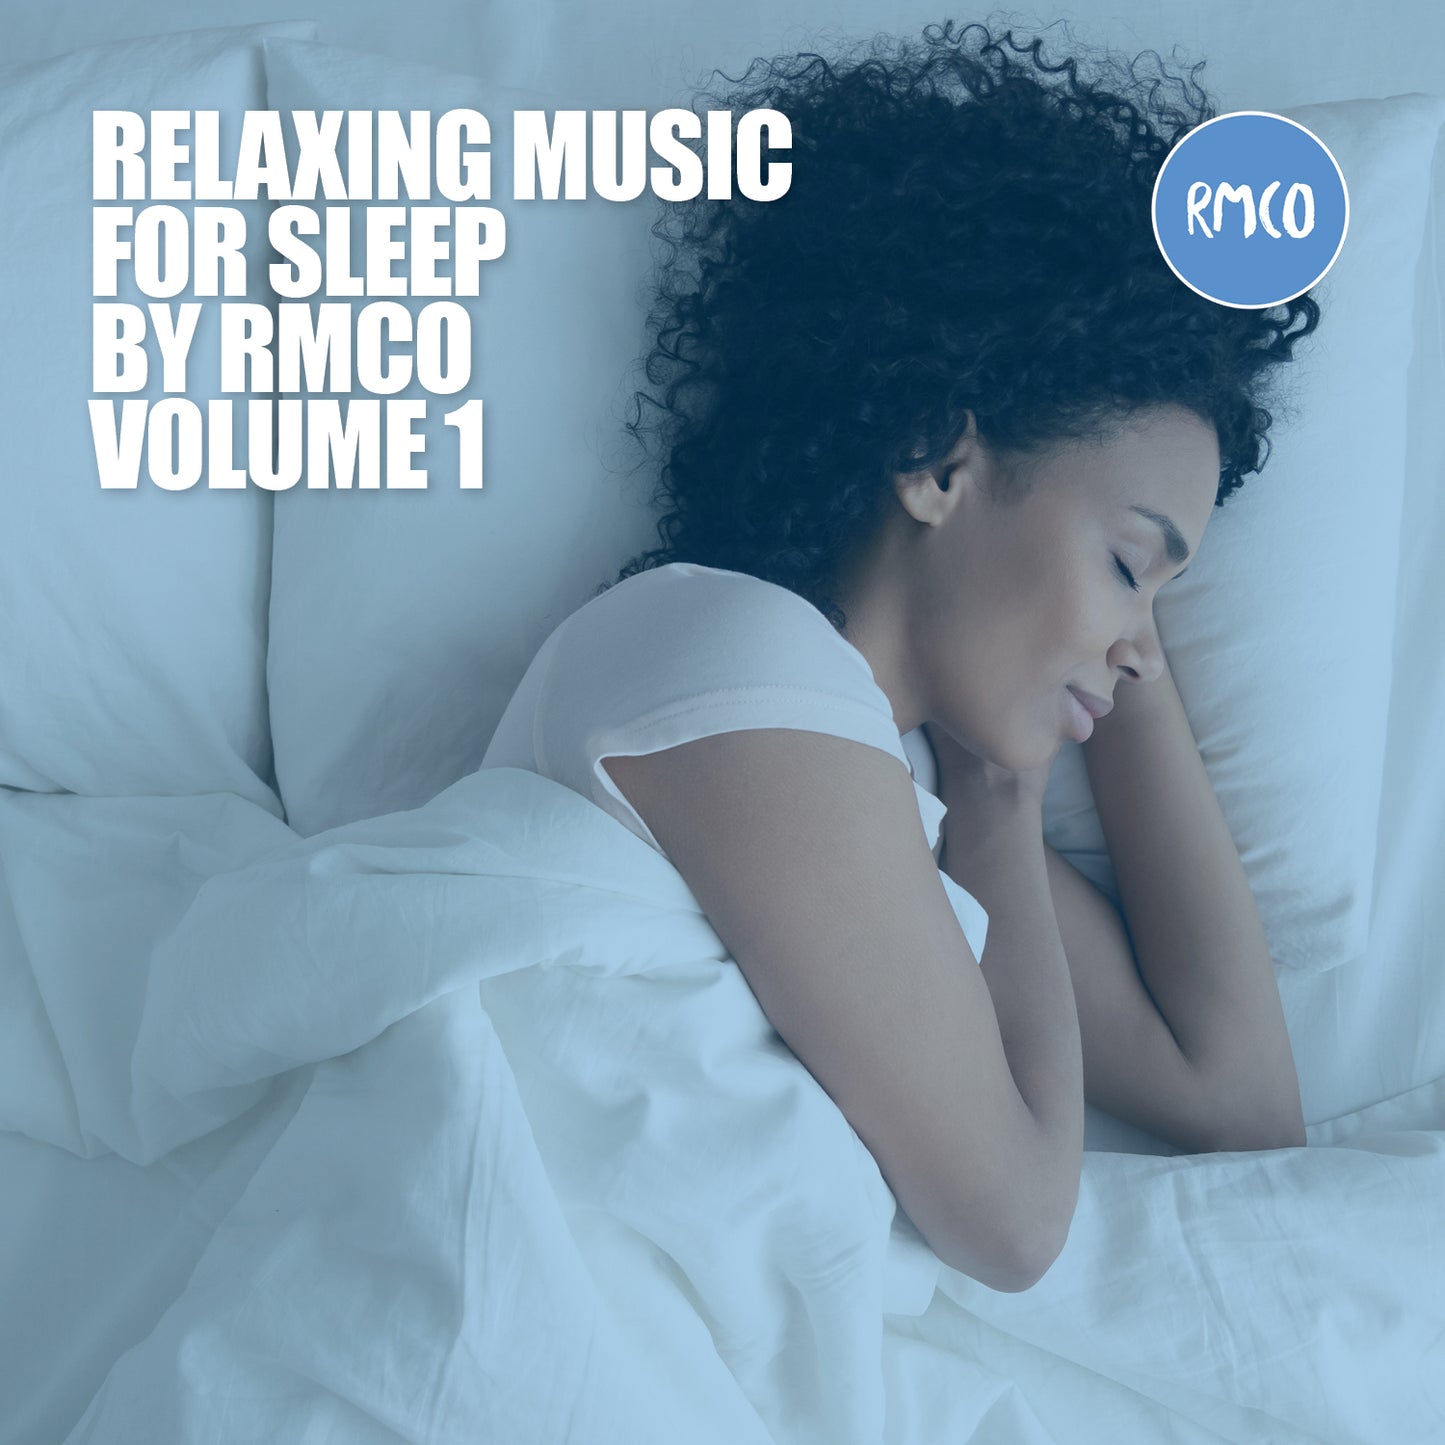 Relaxing Music For Sleep, Vol. 1 by RMCO